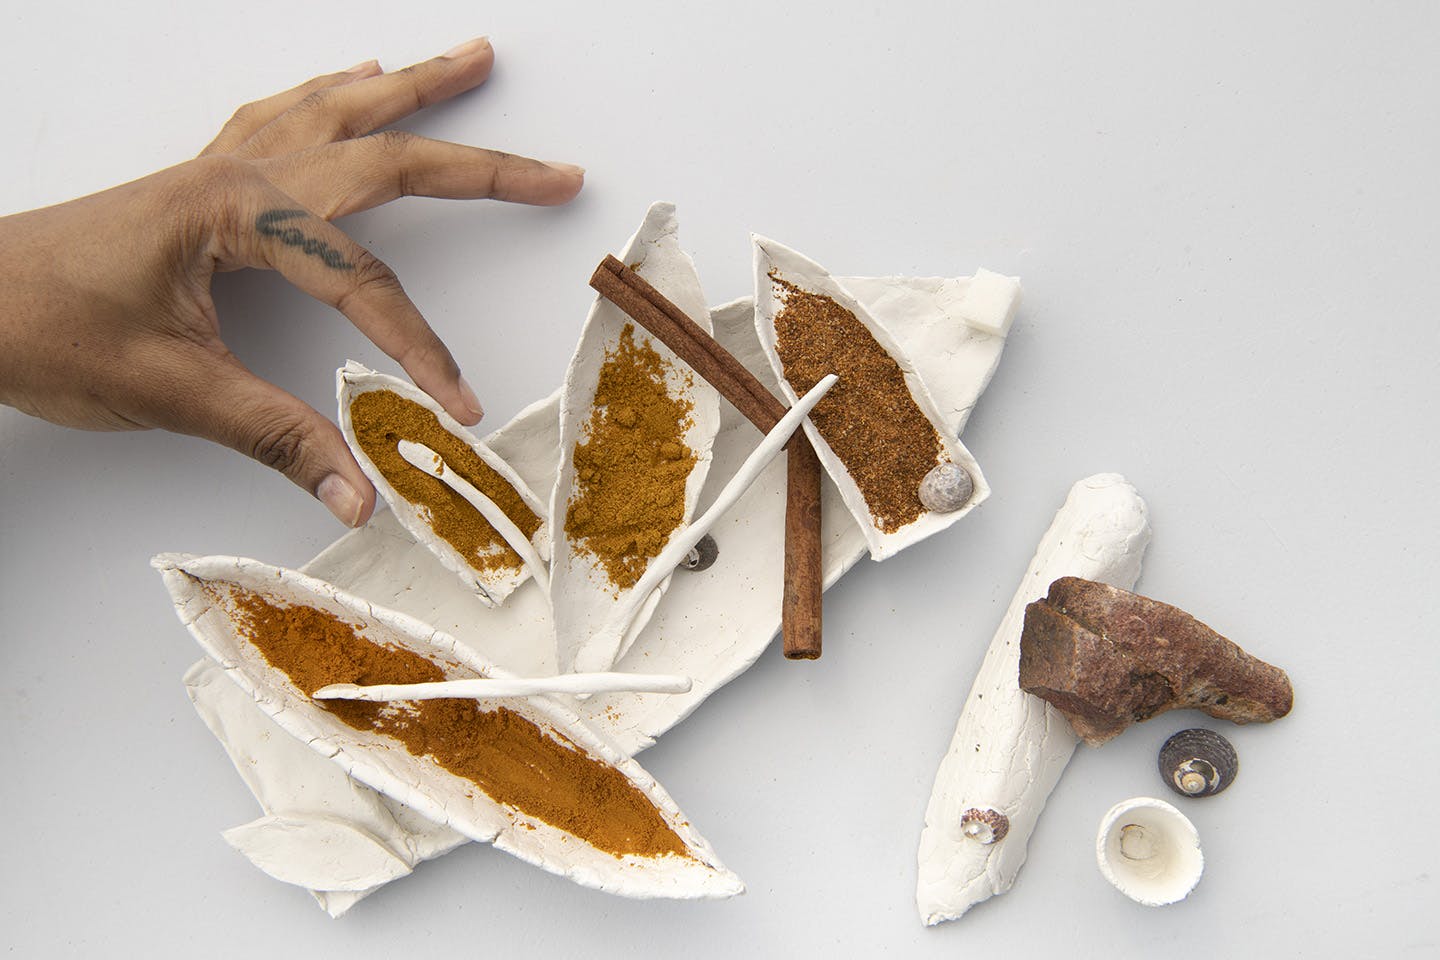 Pieces such as these spice servers—Dichotomies of Water